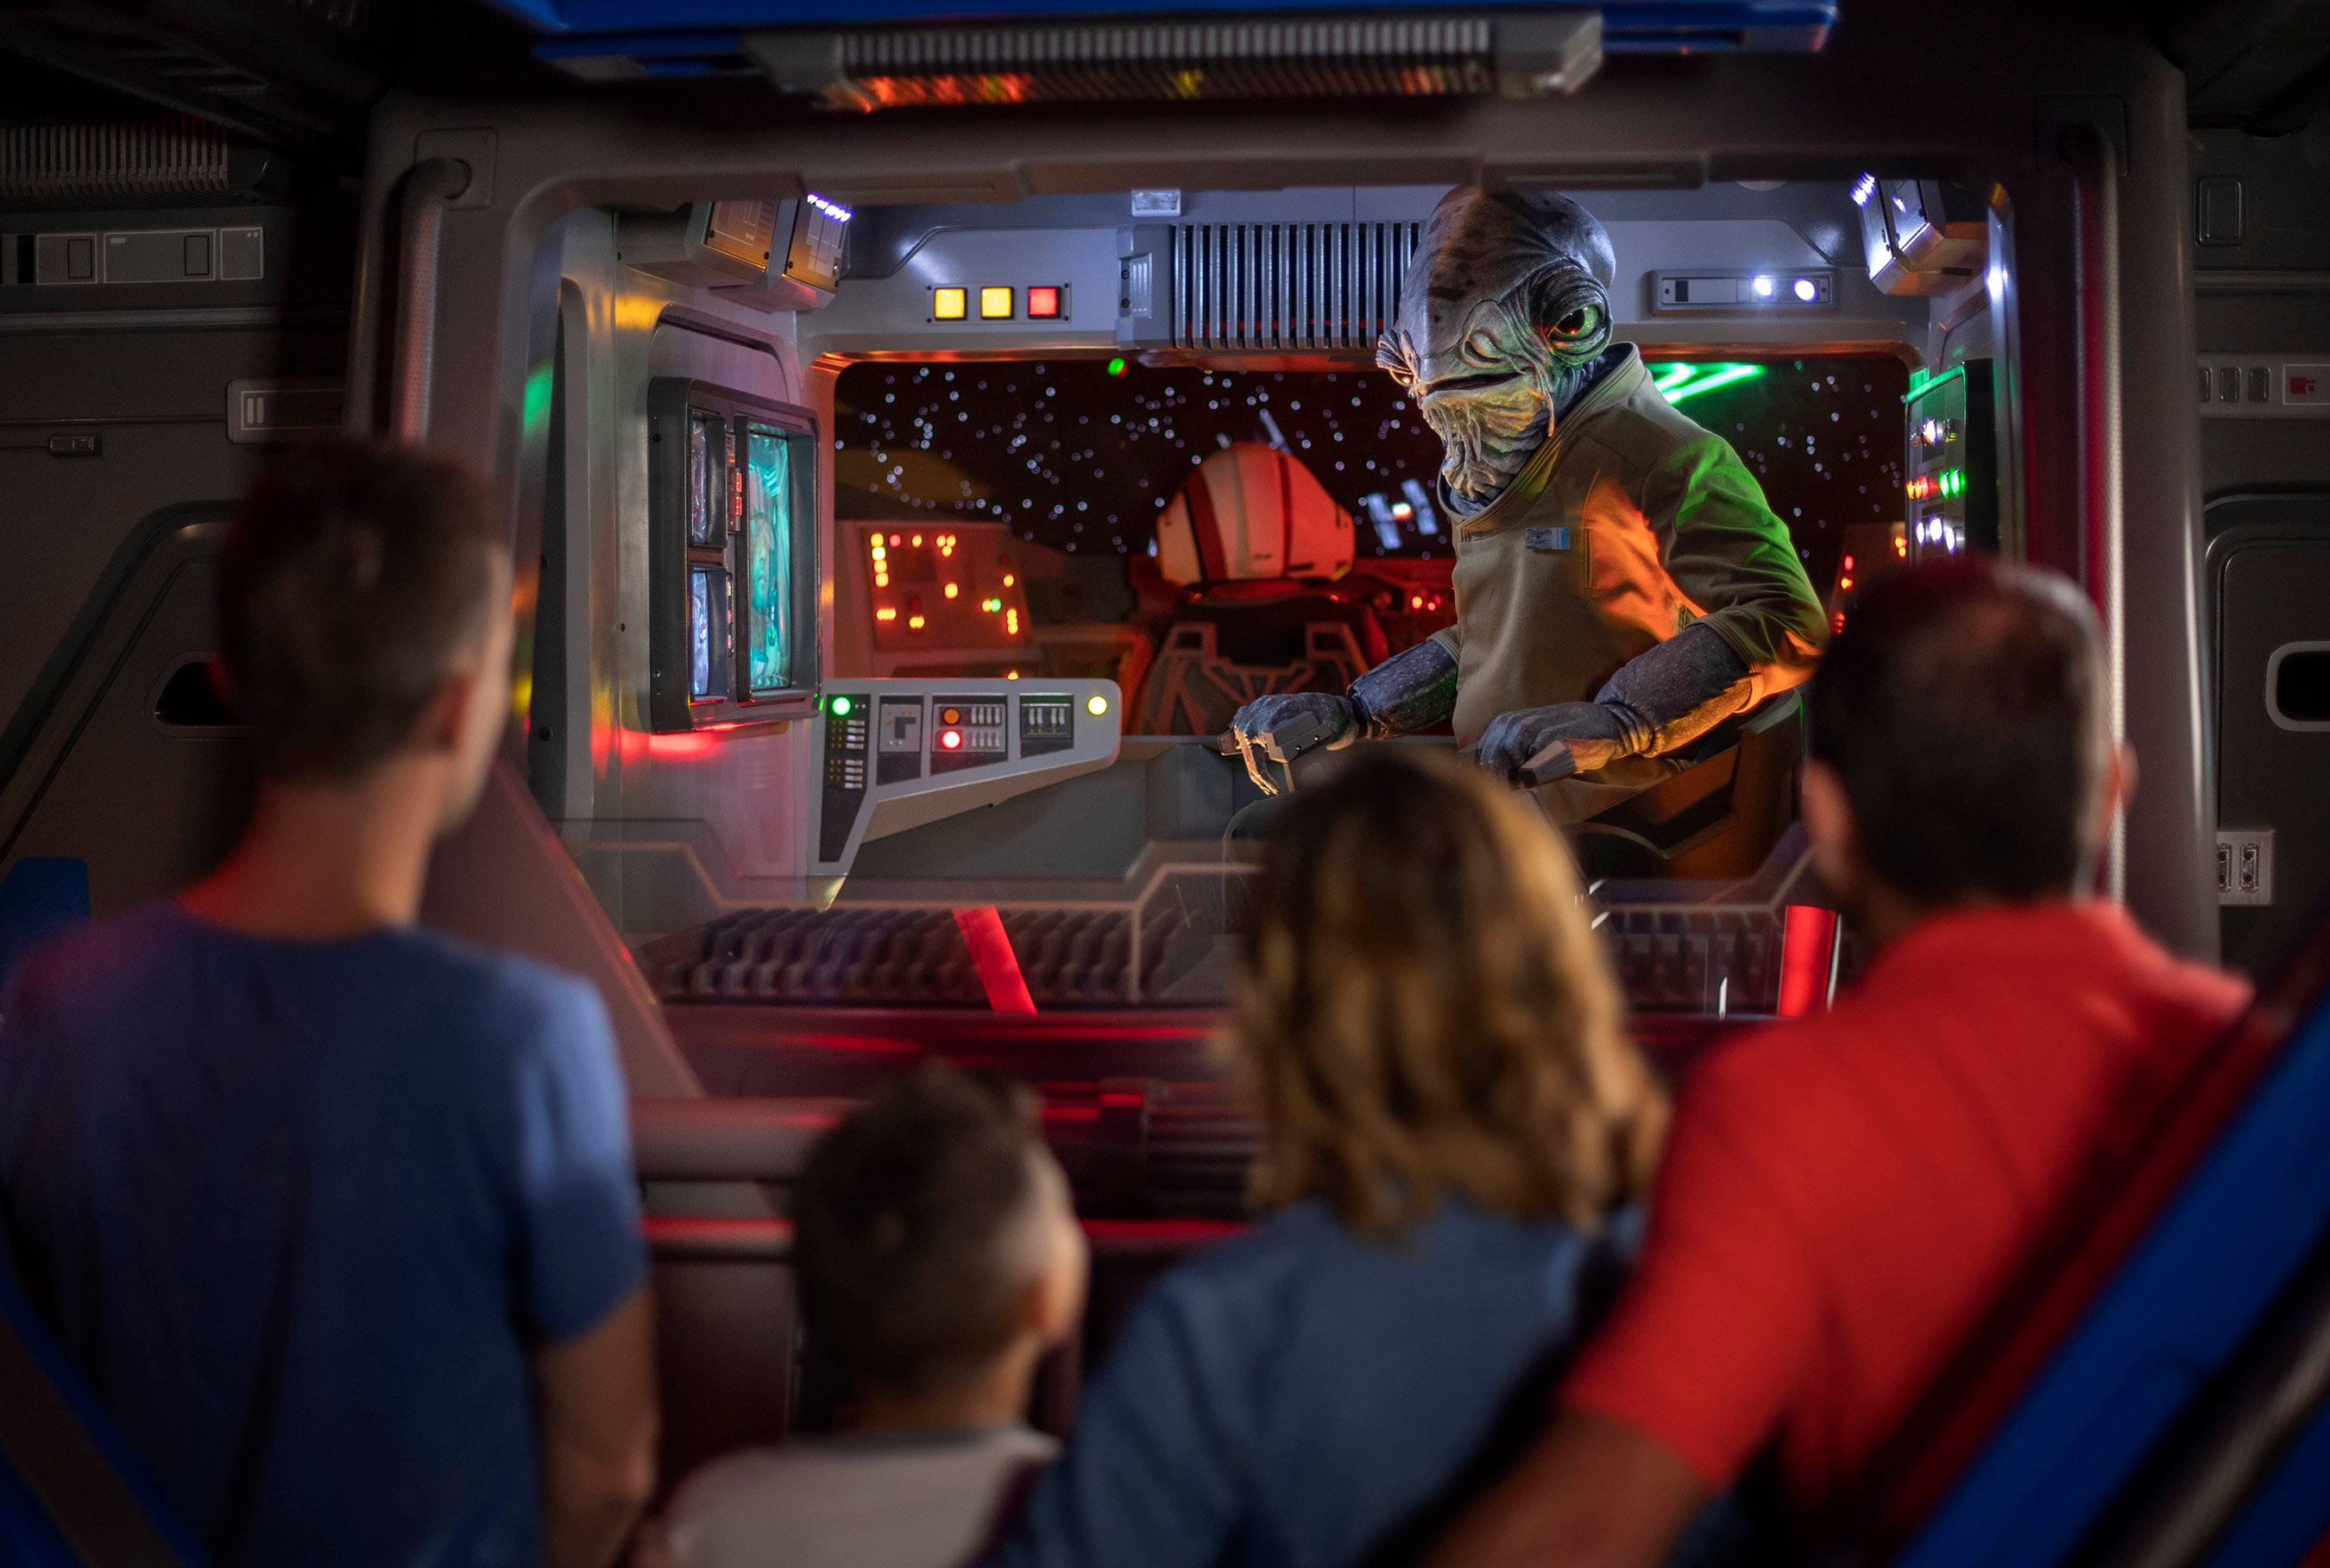 Inside the queue and ride of Star Wars Rise of the Resistance